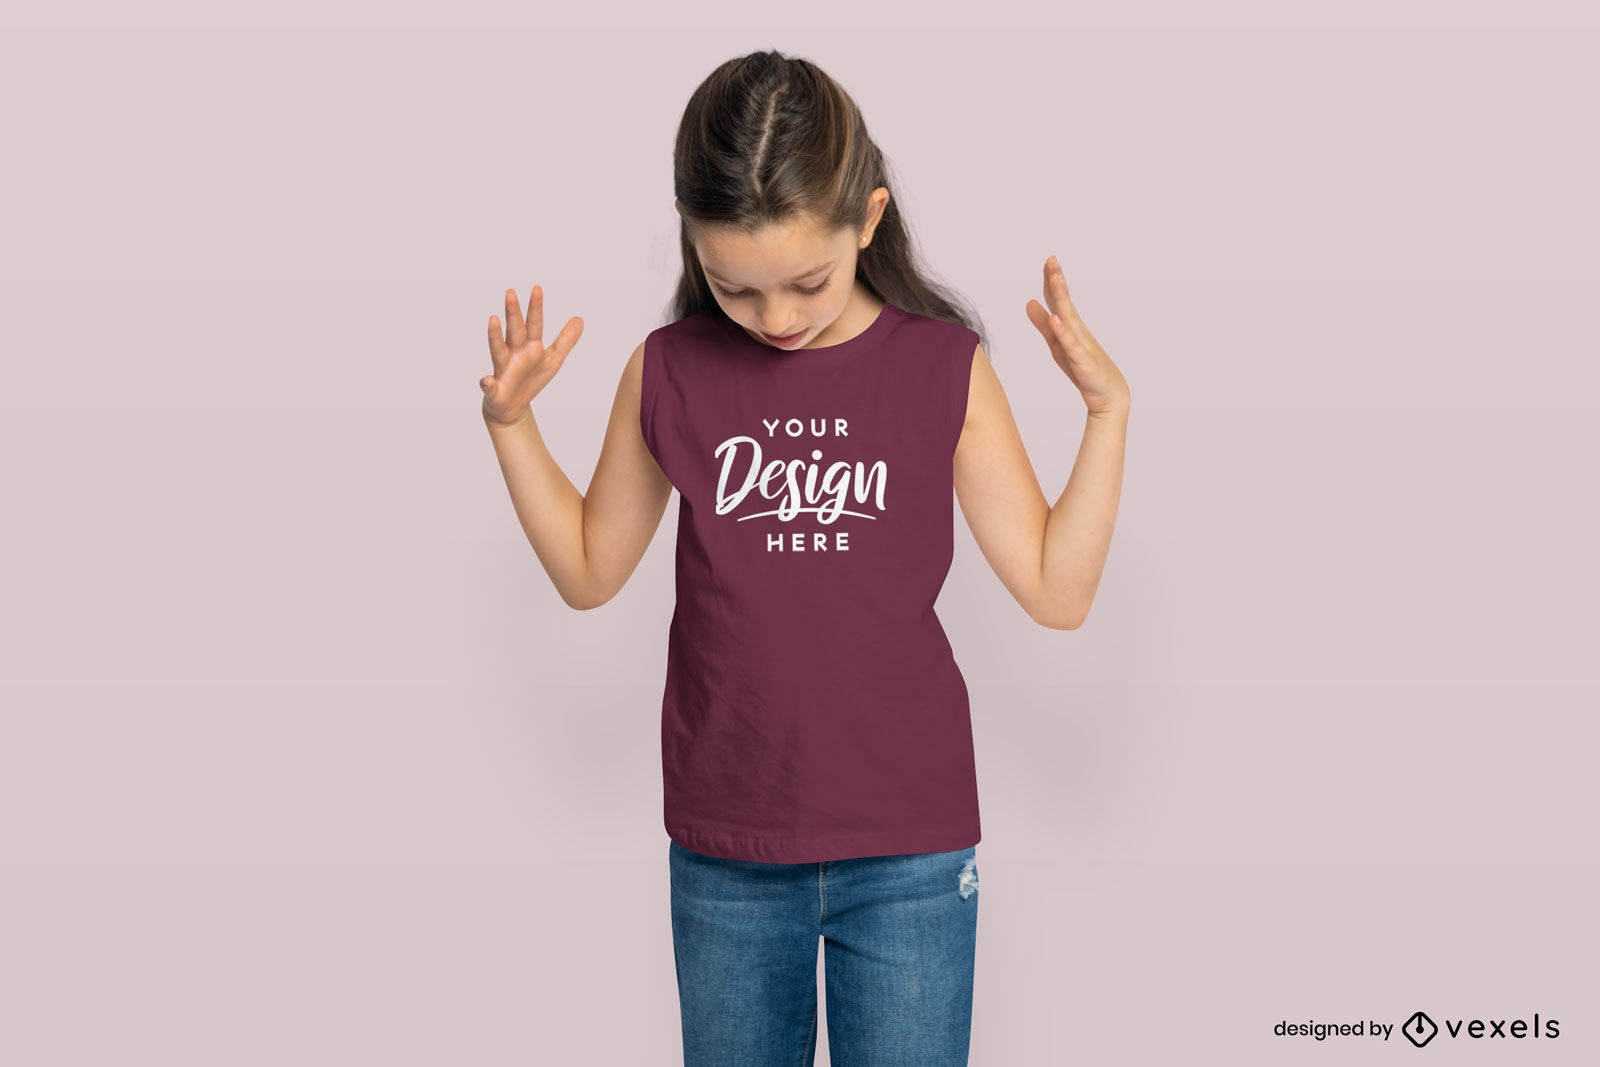 Child girl looking and wearing tank top mockup